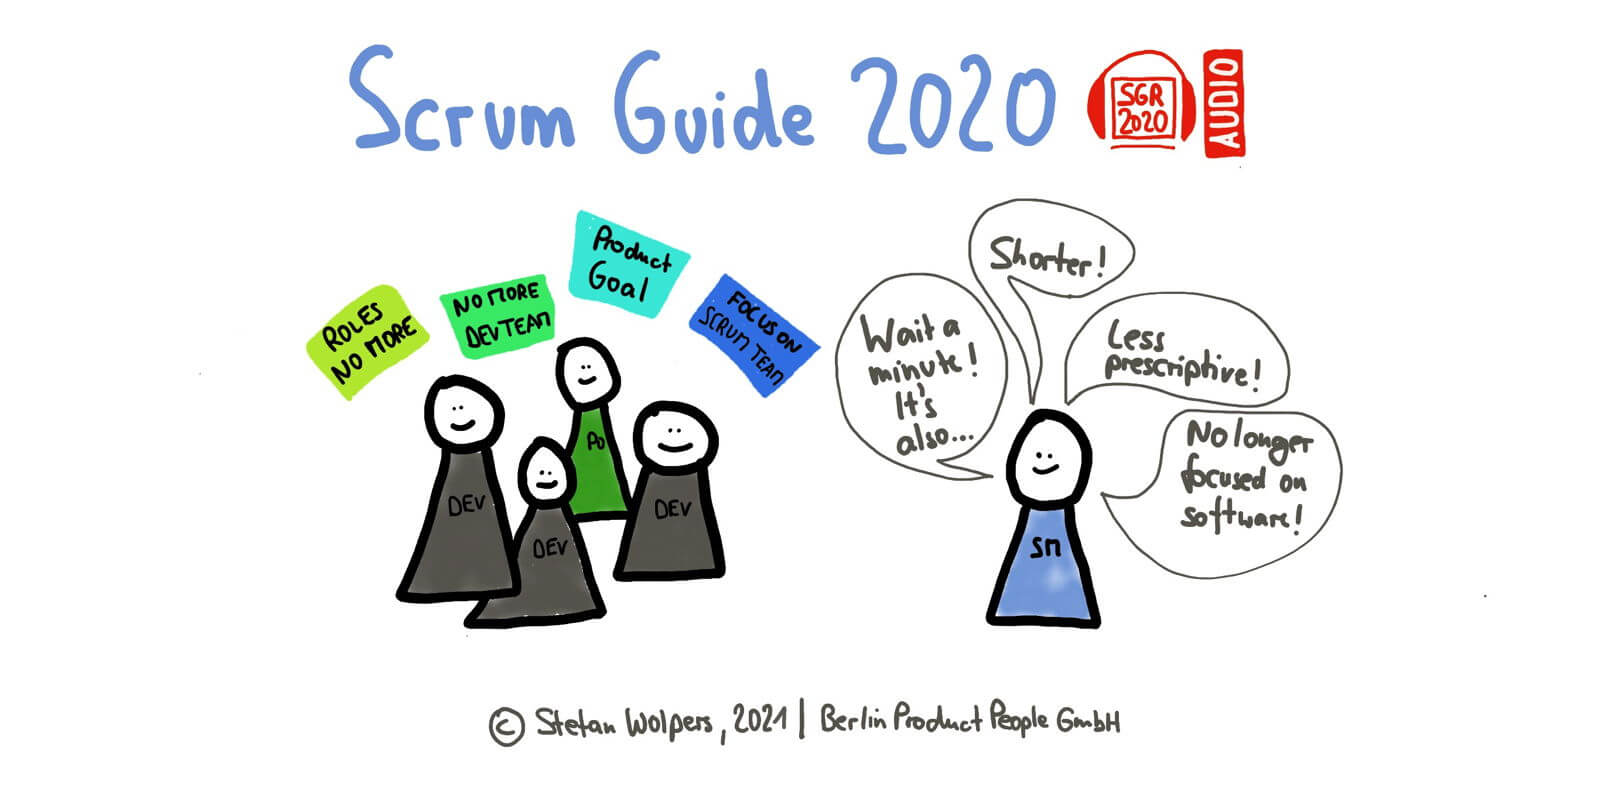 Download the Audiobook of the Scrum Guide 2020 Reordered for Free — Age-of-Product.com